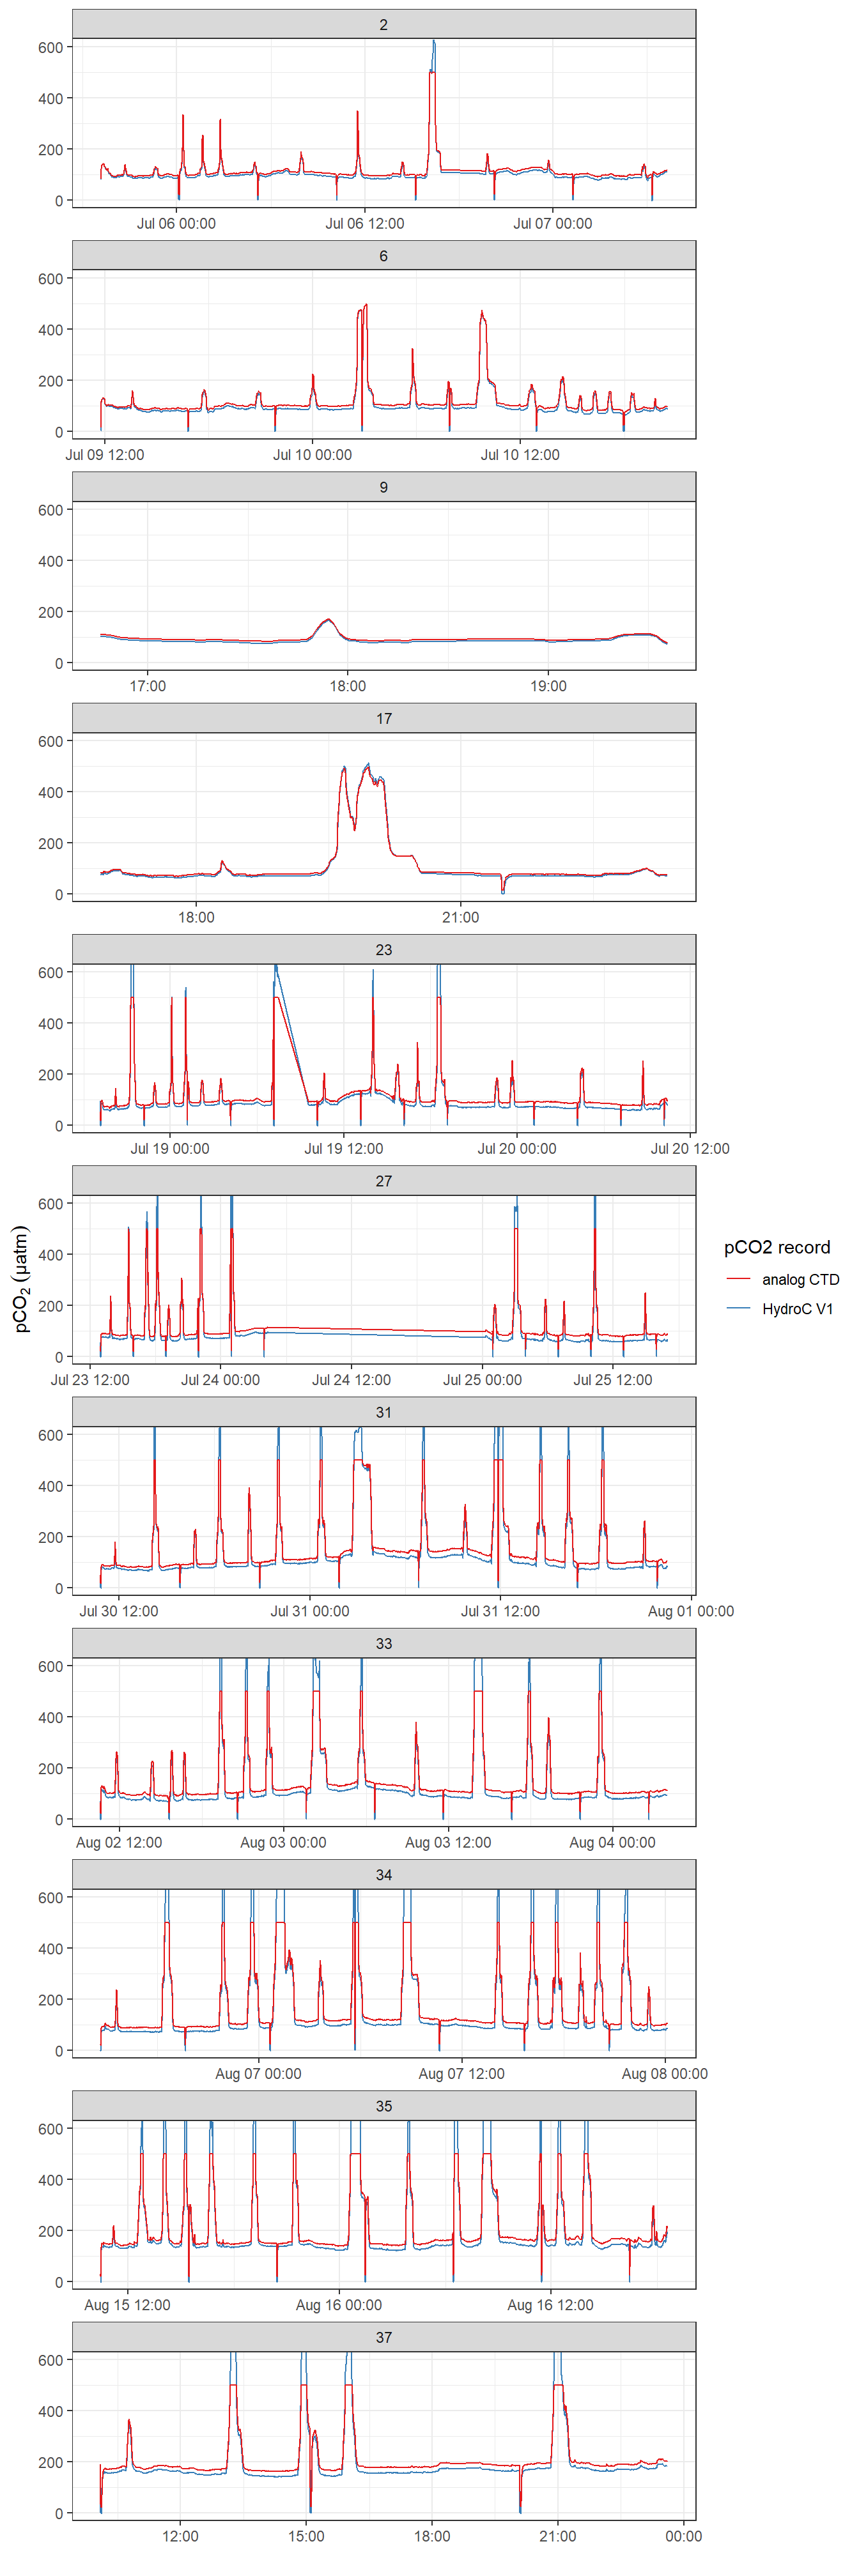 pCO~2~ record after interpolation to HydroC timestamp (analog output from HydroC recorded with CTD and drift corrected HydroC data V1 provided by Contos). ID refers to the starting date of each cruise. Please note that measurement range of the analog signal is technically restricted to 100-500  µatm. Zeroing periods are included.